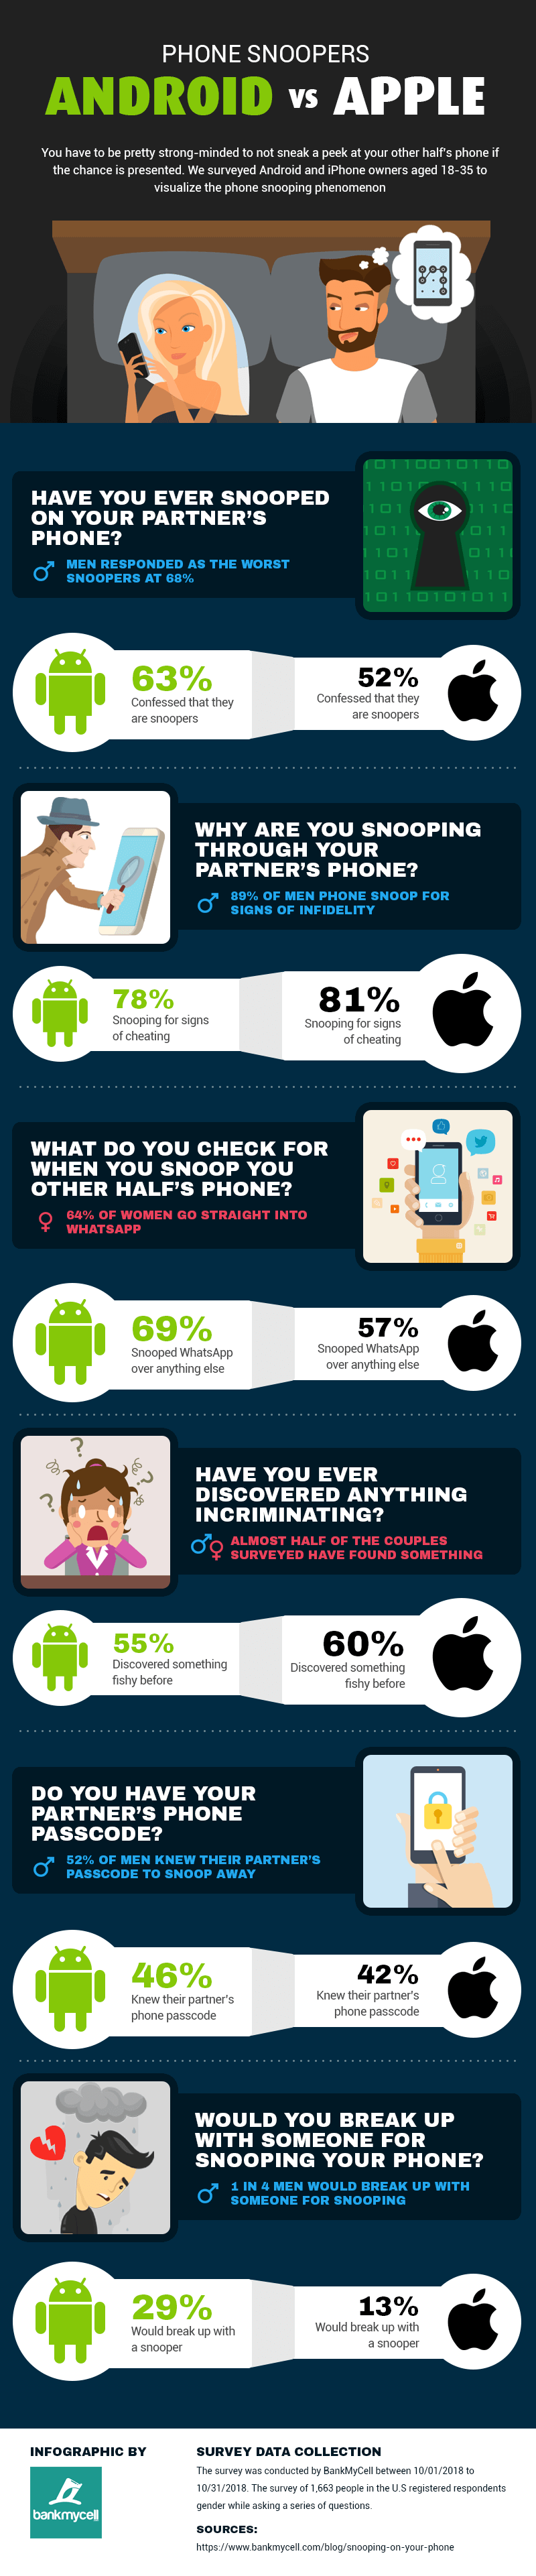 Phone snoopers by OS infographic